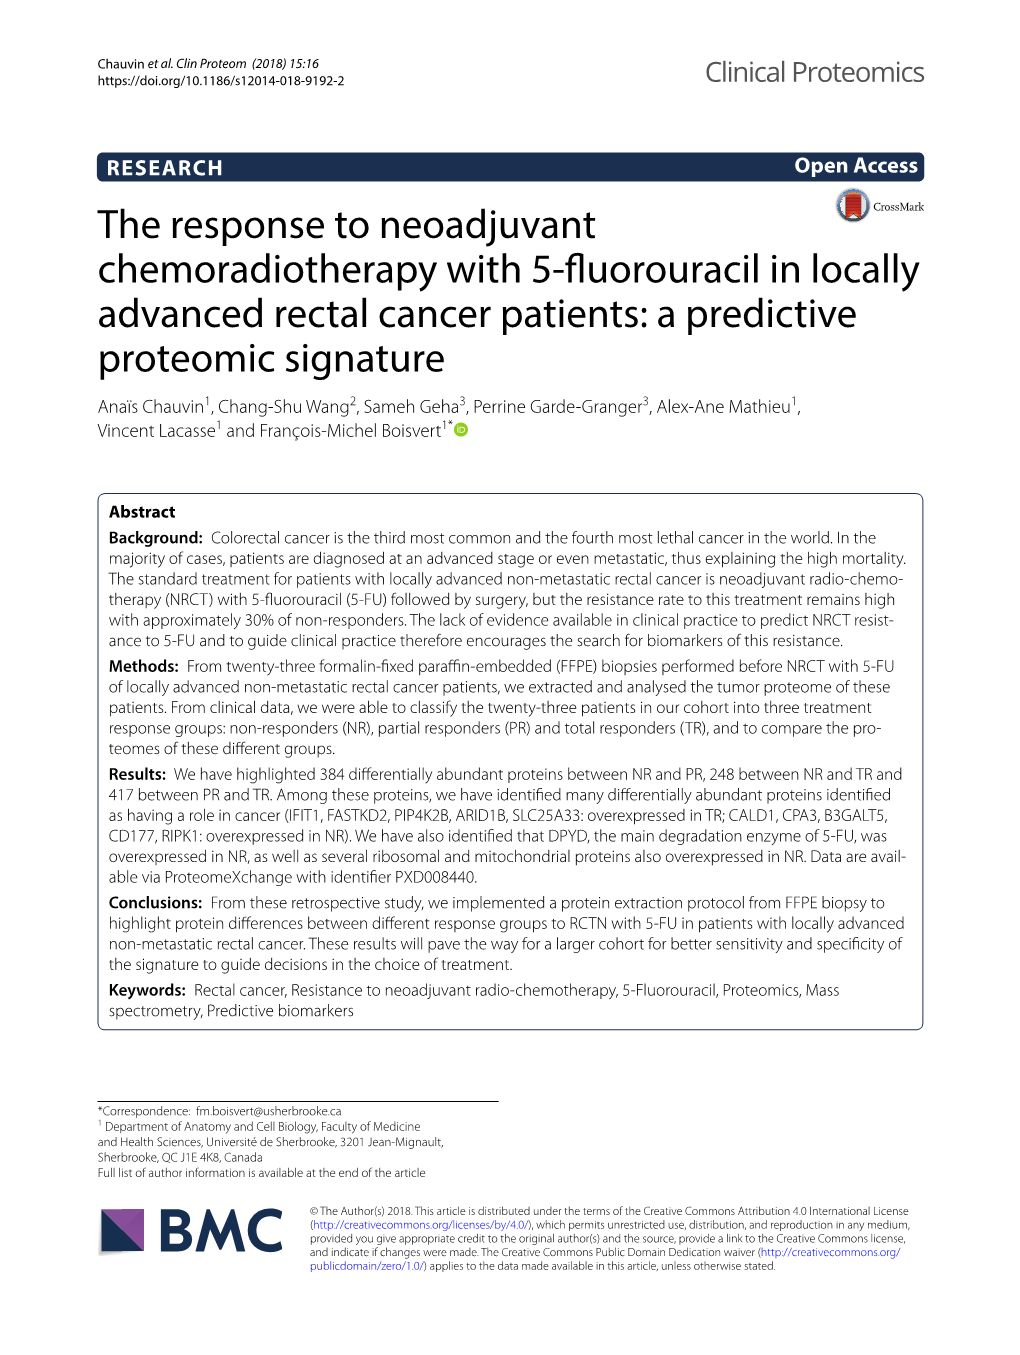 The Response to Neoadjuvant Chemoradiotherapy with 5